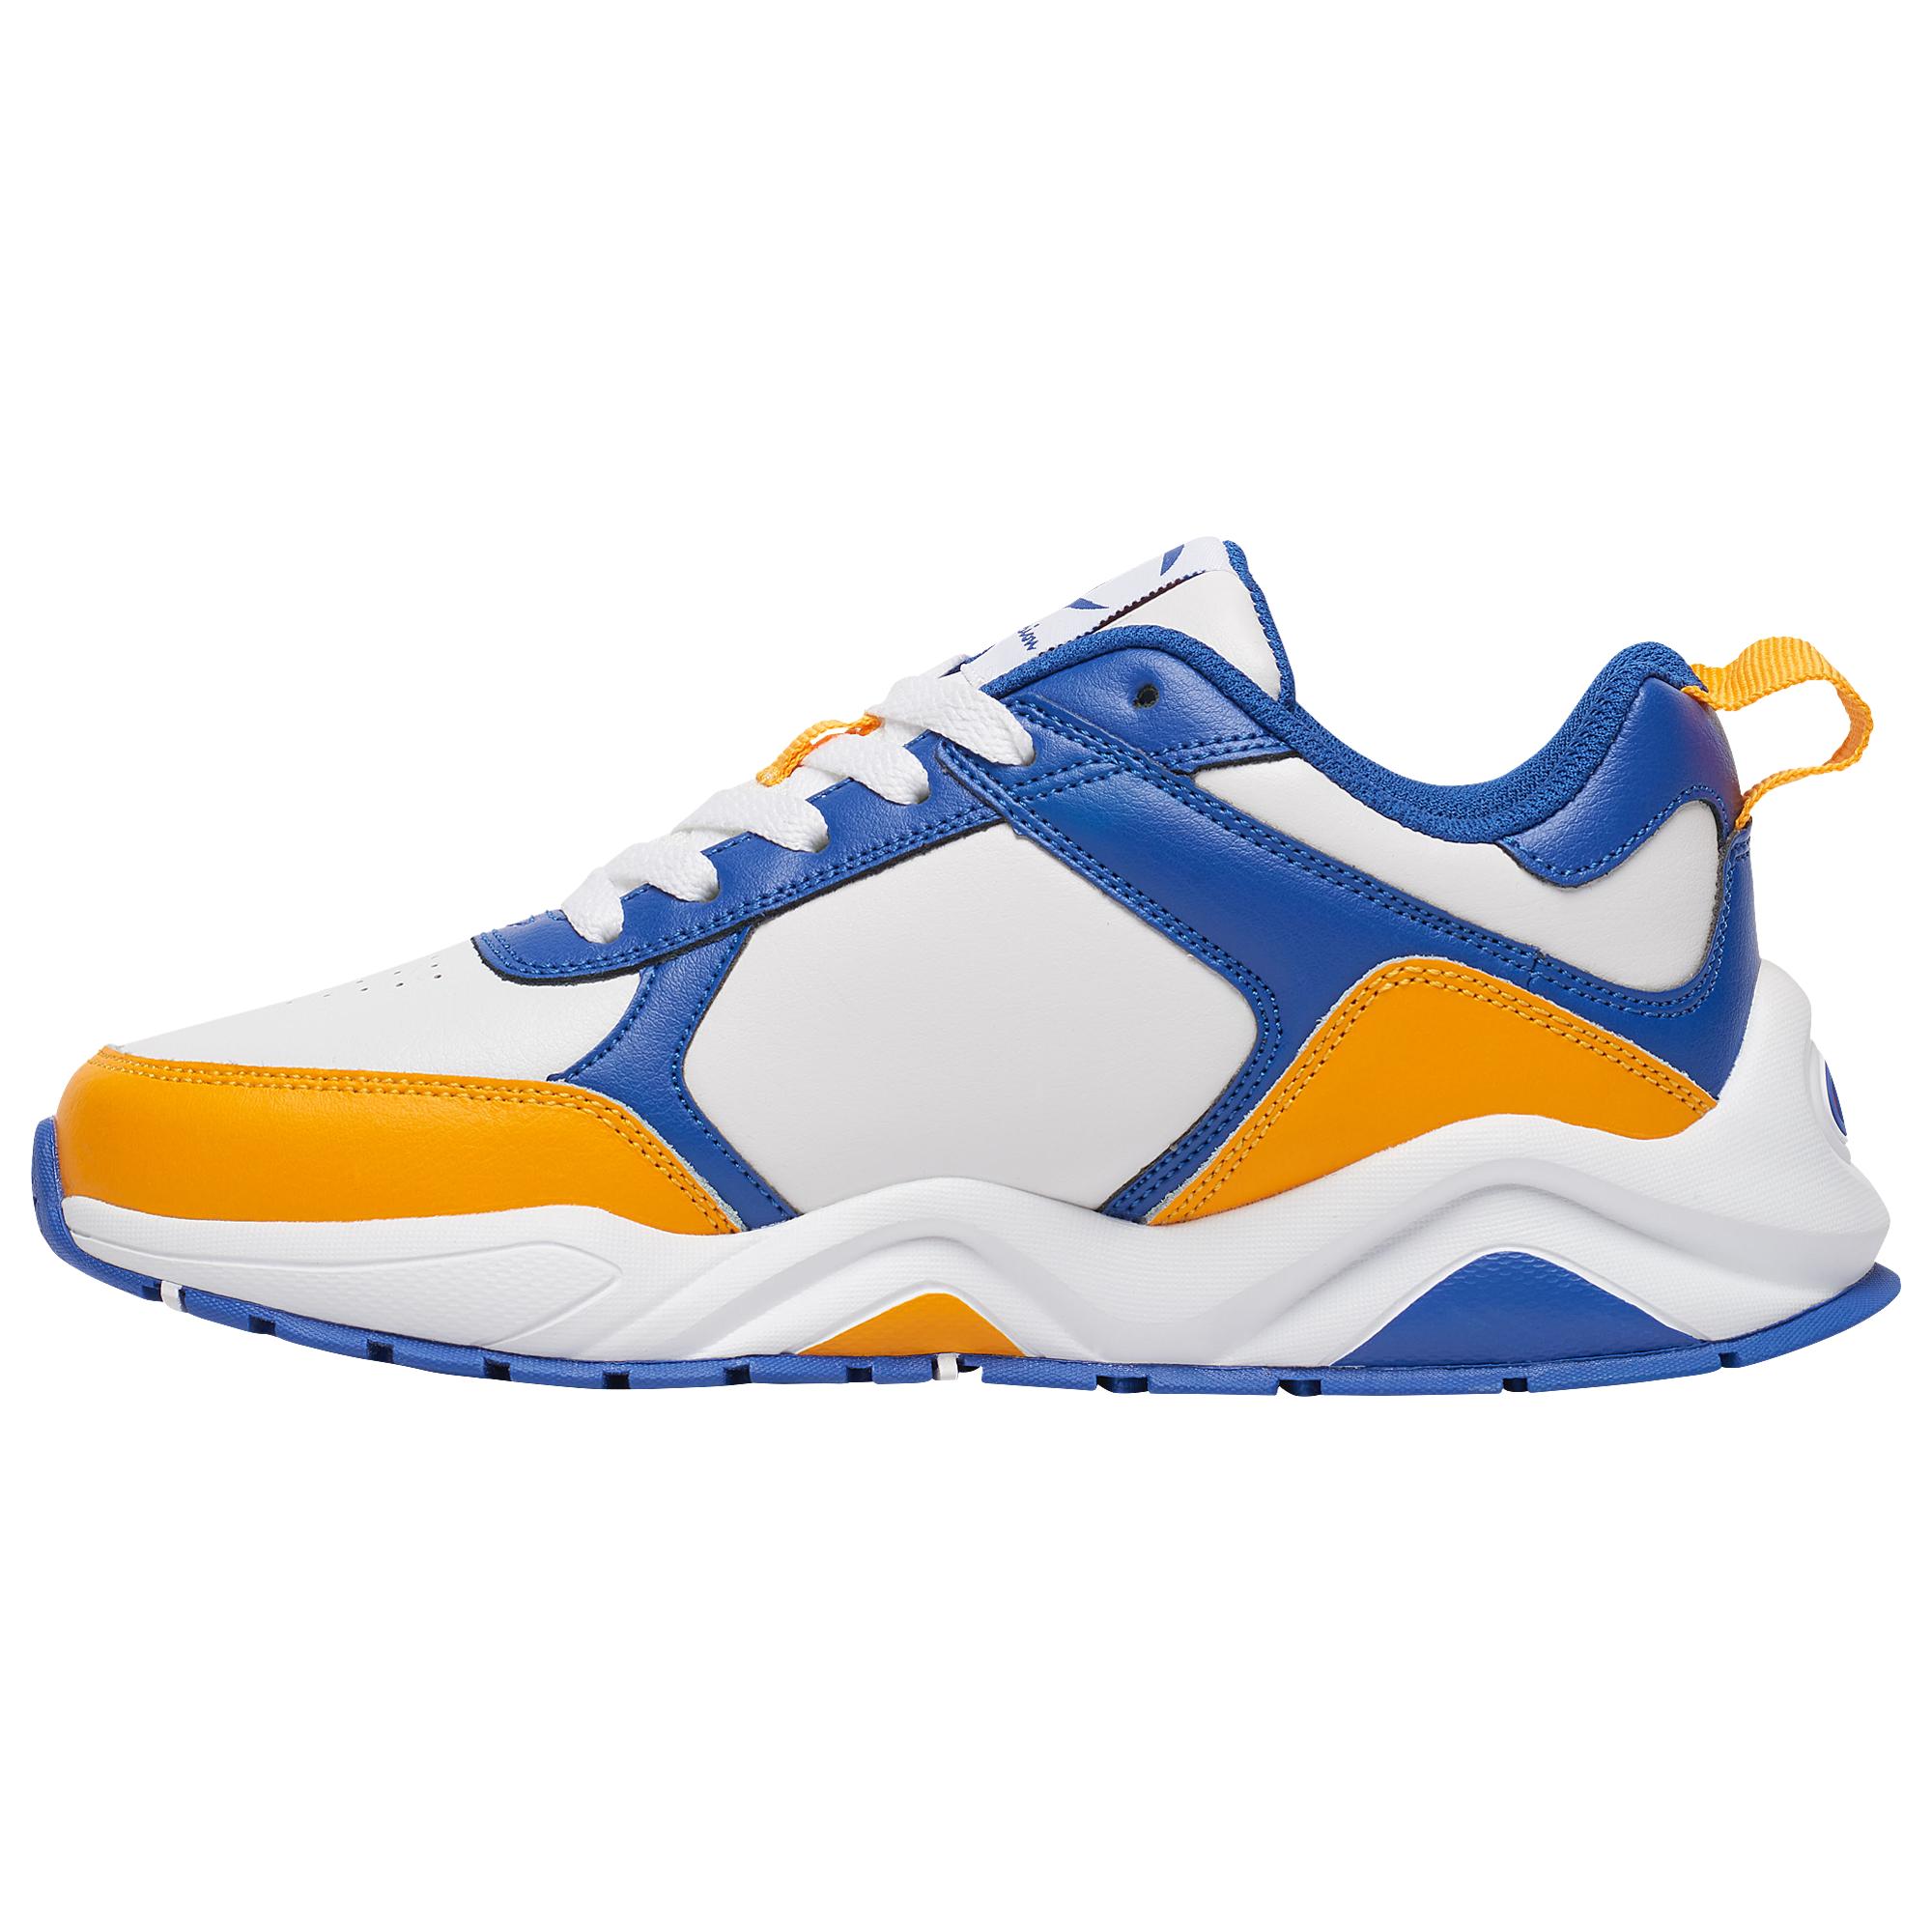 blue and yellow champion shoes